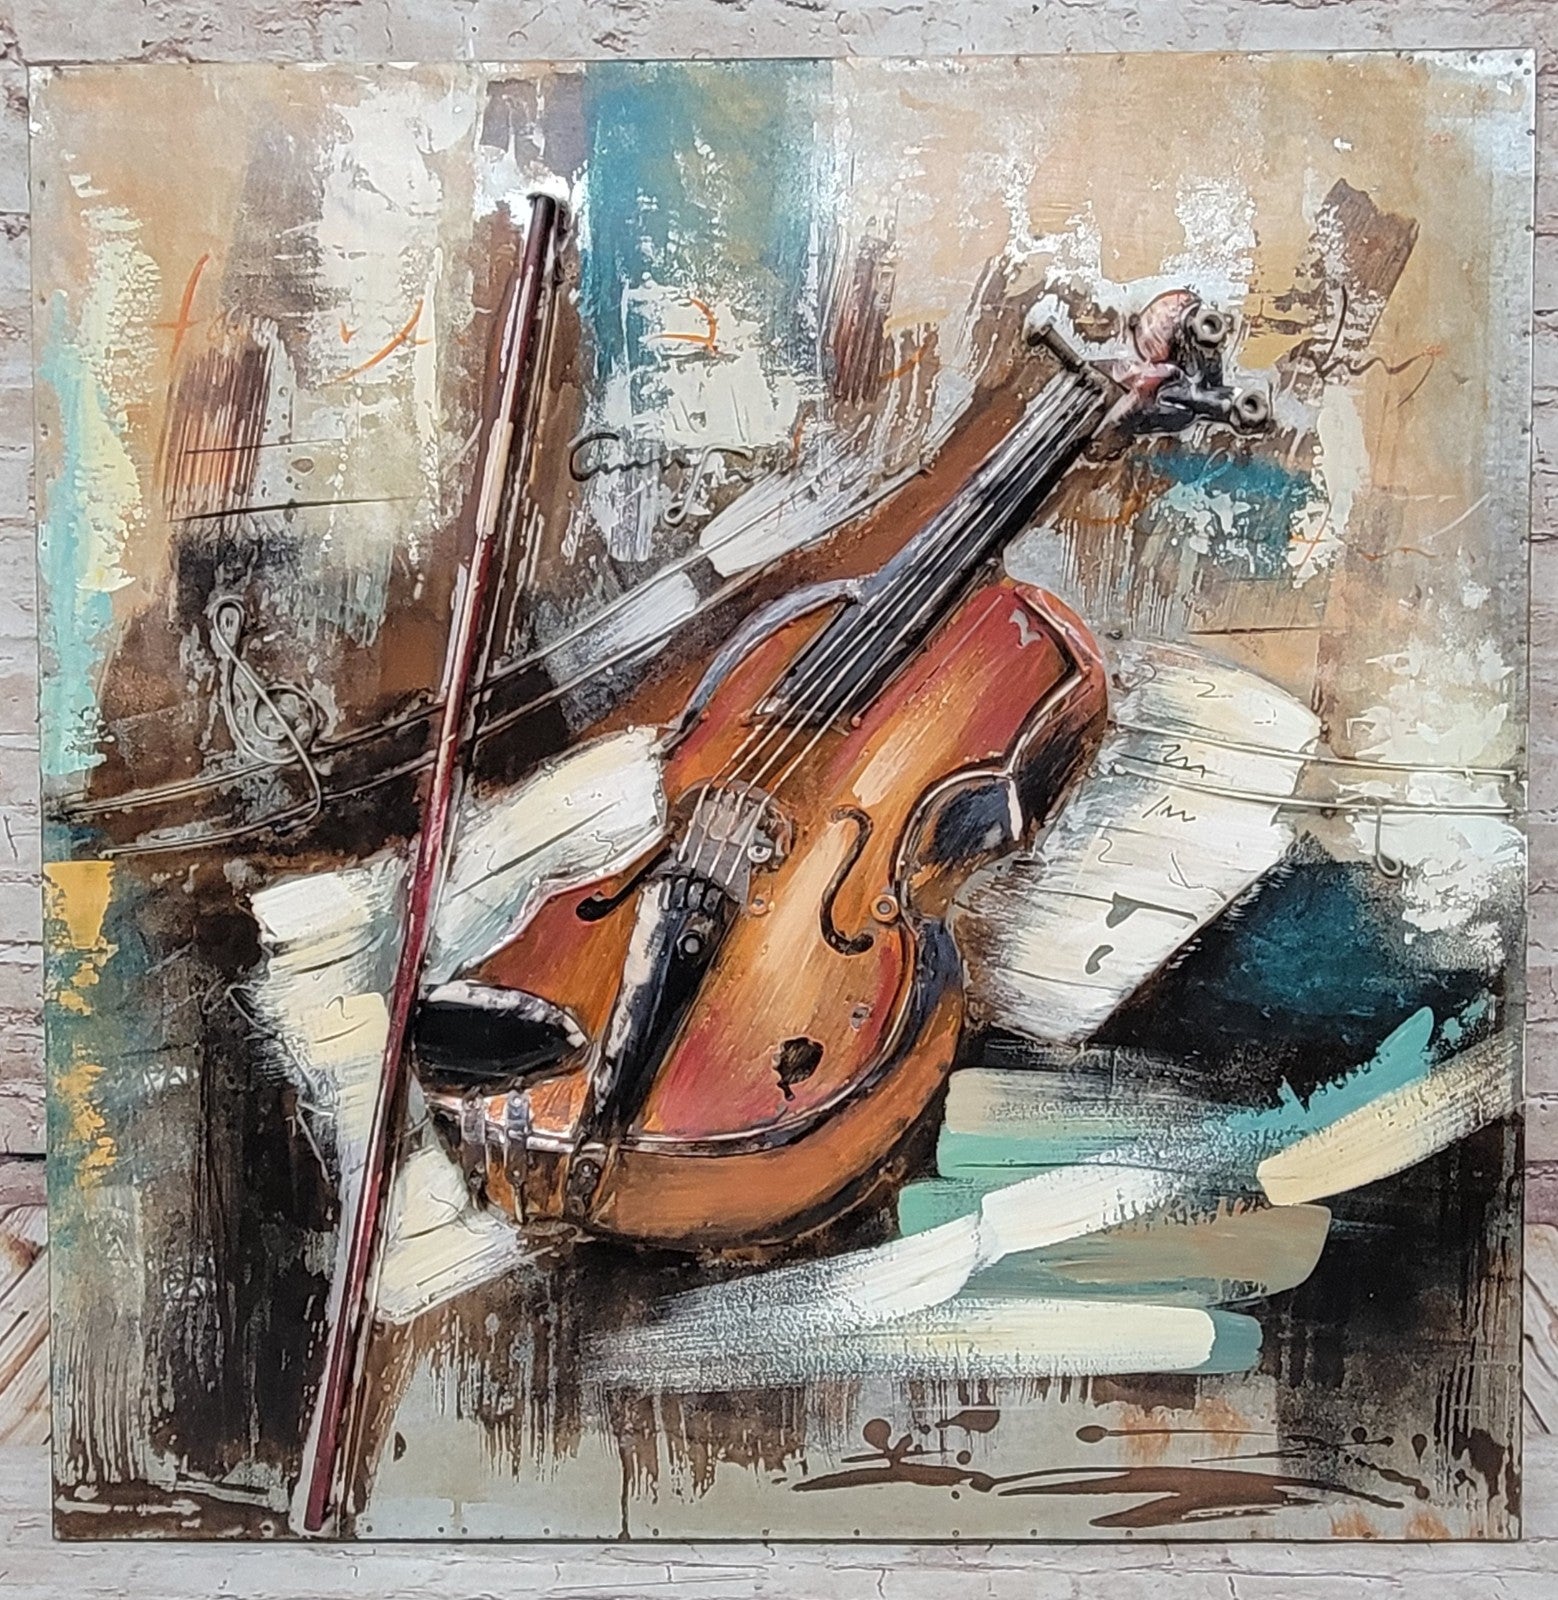 3D Wall Art Abstract Painting on canvas Violin Music Wall Sculpture Ha